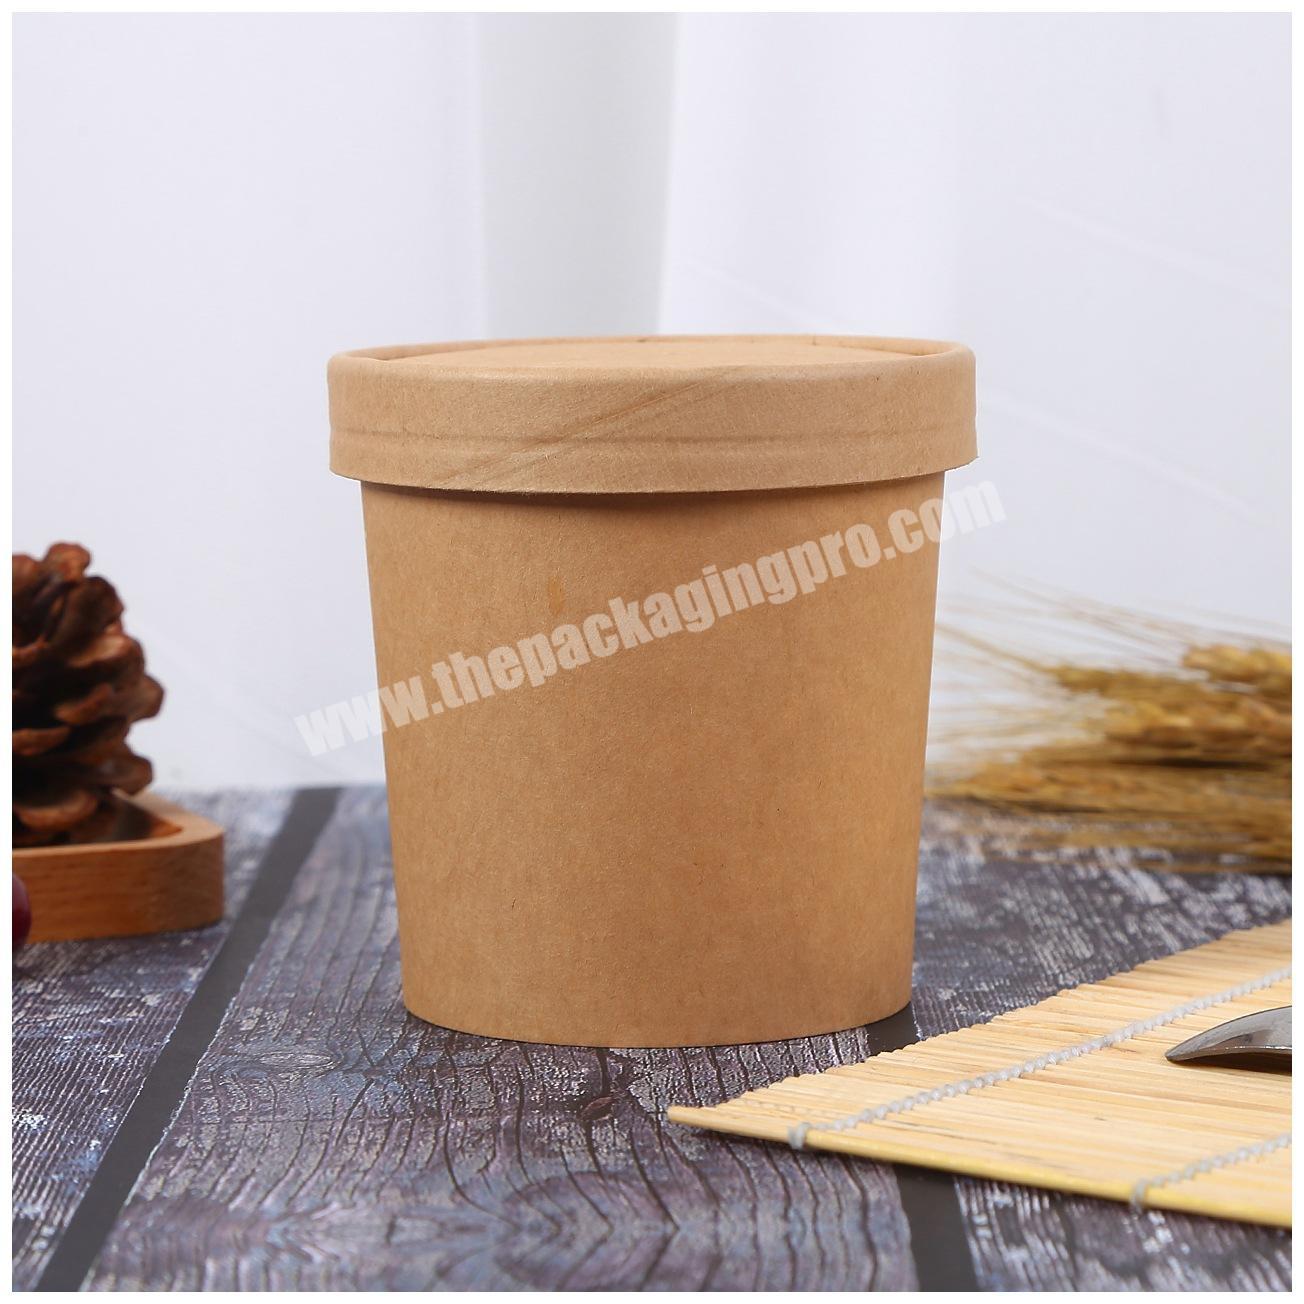 China Customized Disposable Paper Bowls With Lids Suppliers